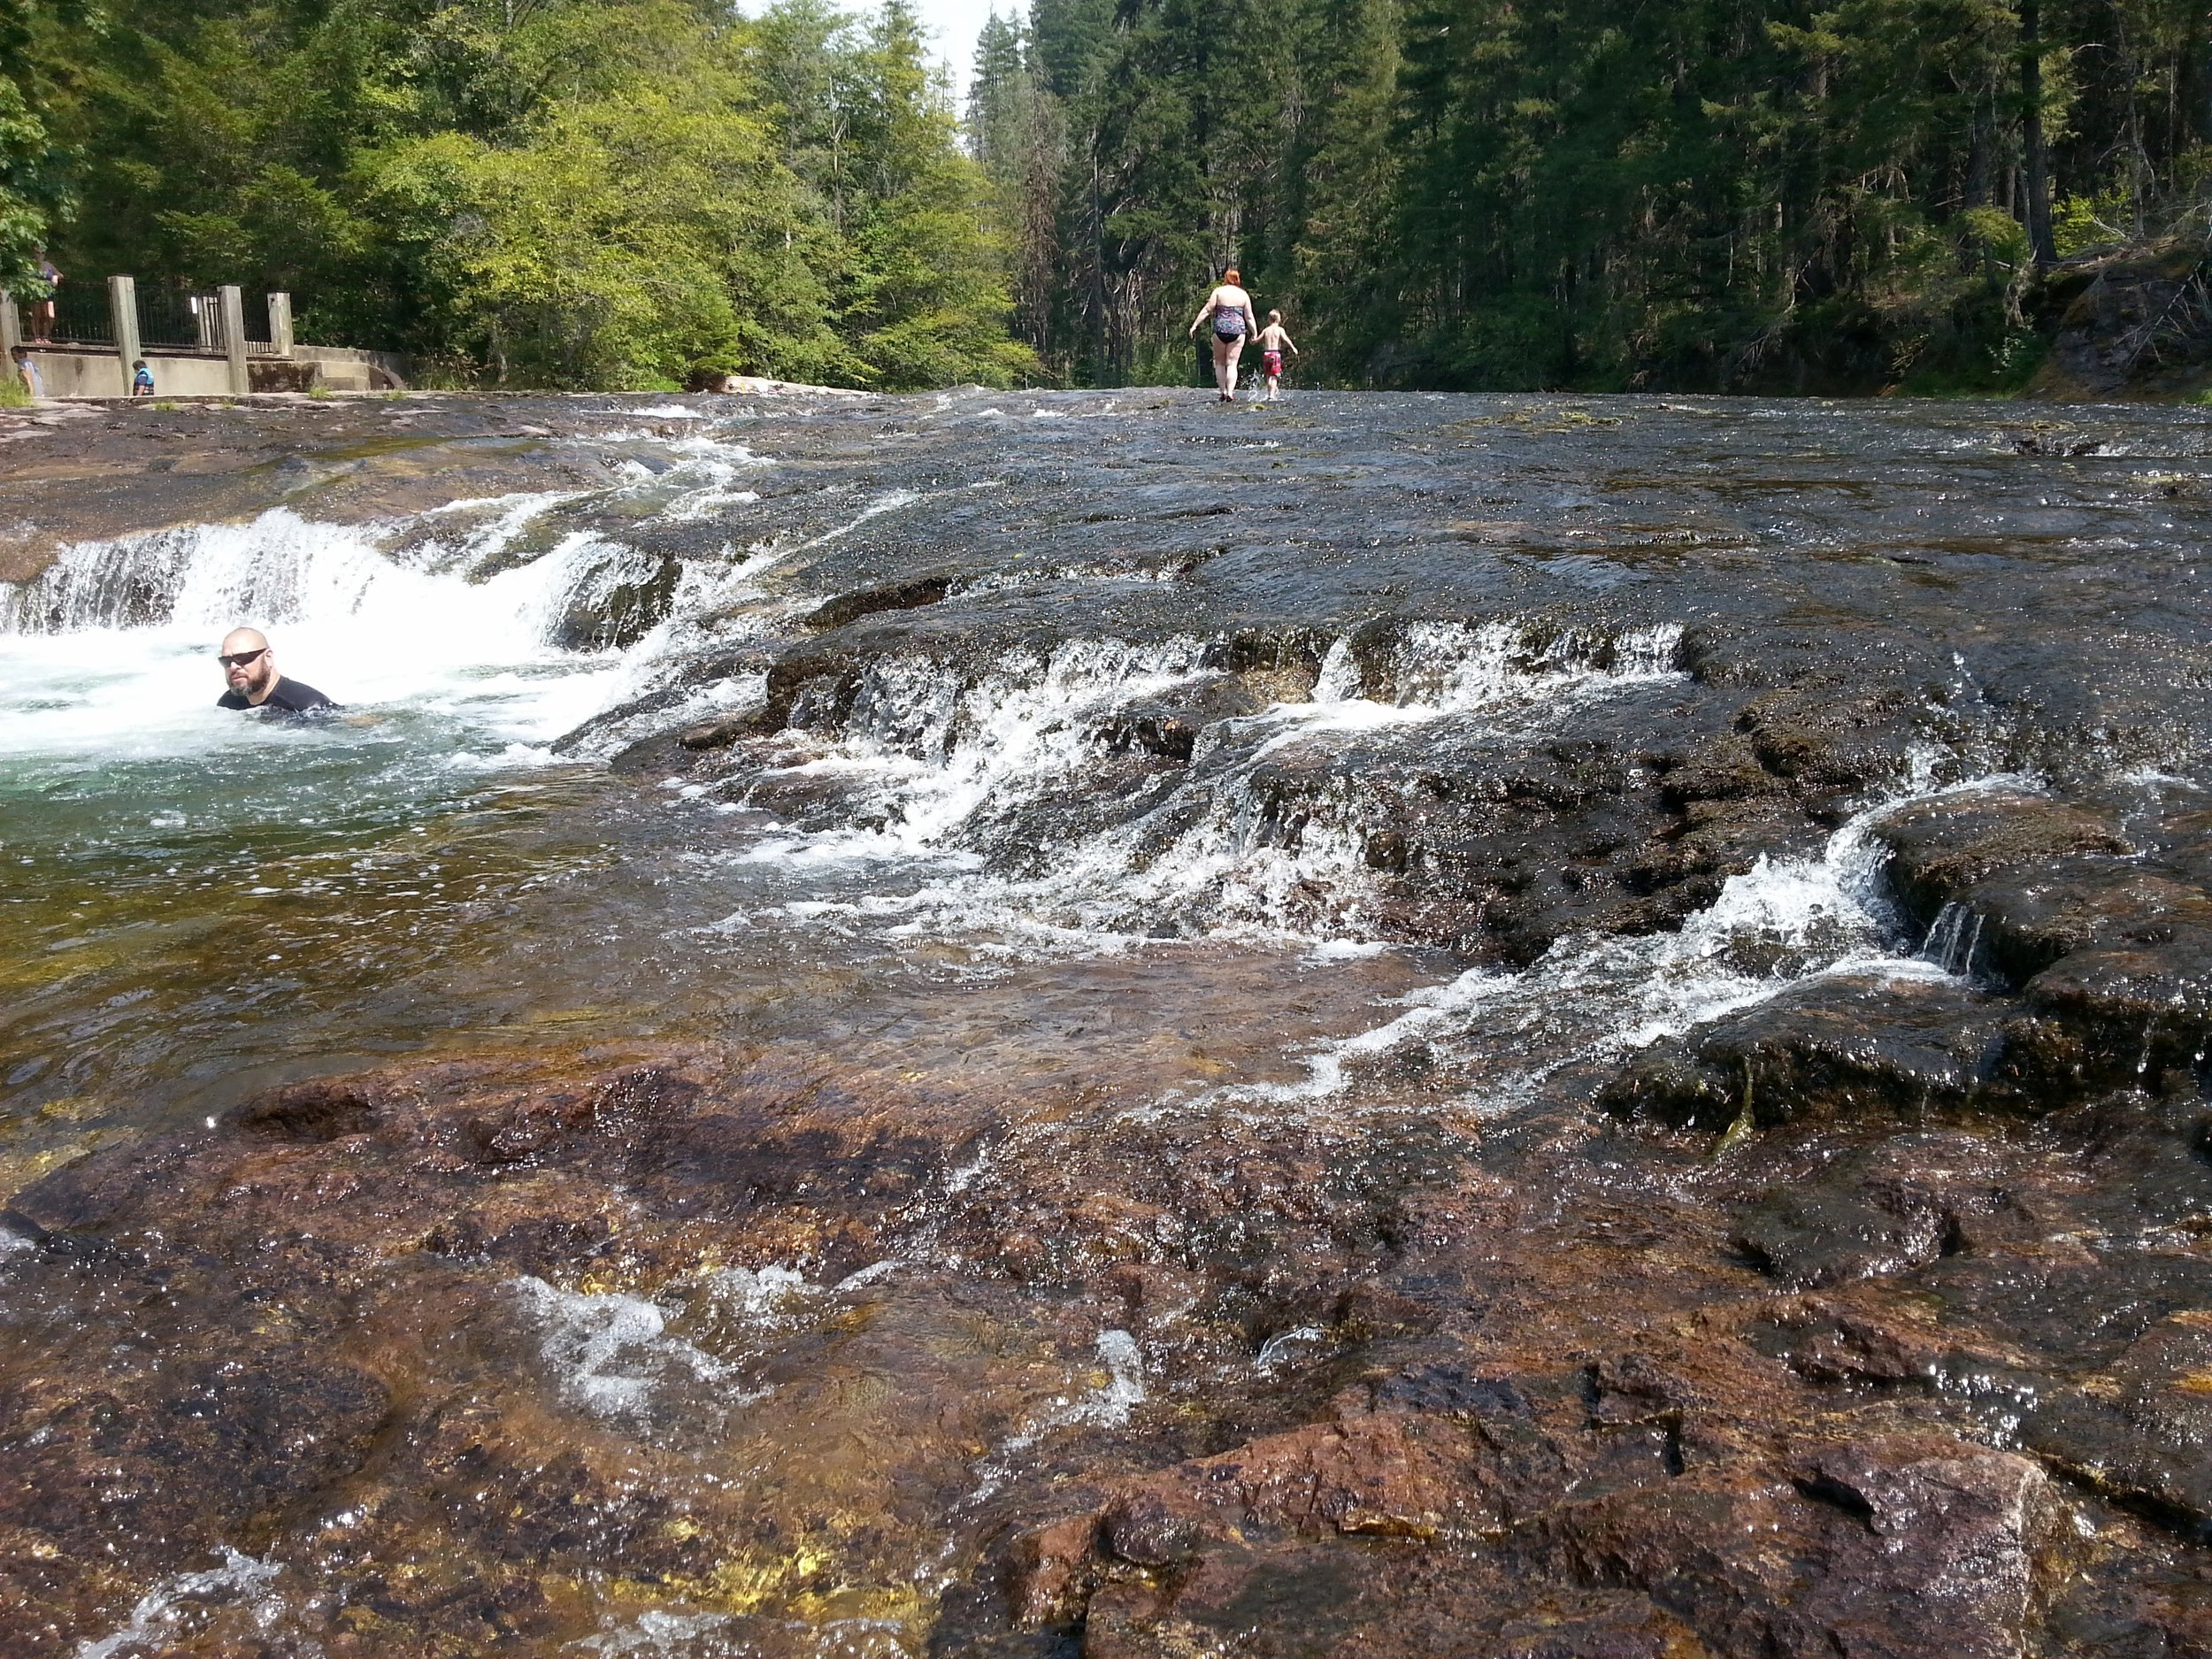 SOUTH UMPQUA FALLS NATURAL WATER SLIDES - What to do in Southern Oregon - Fun with Kids - Outdoor Adventures